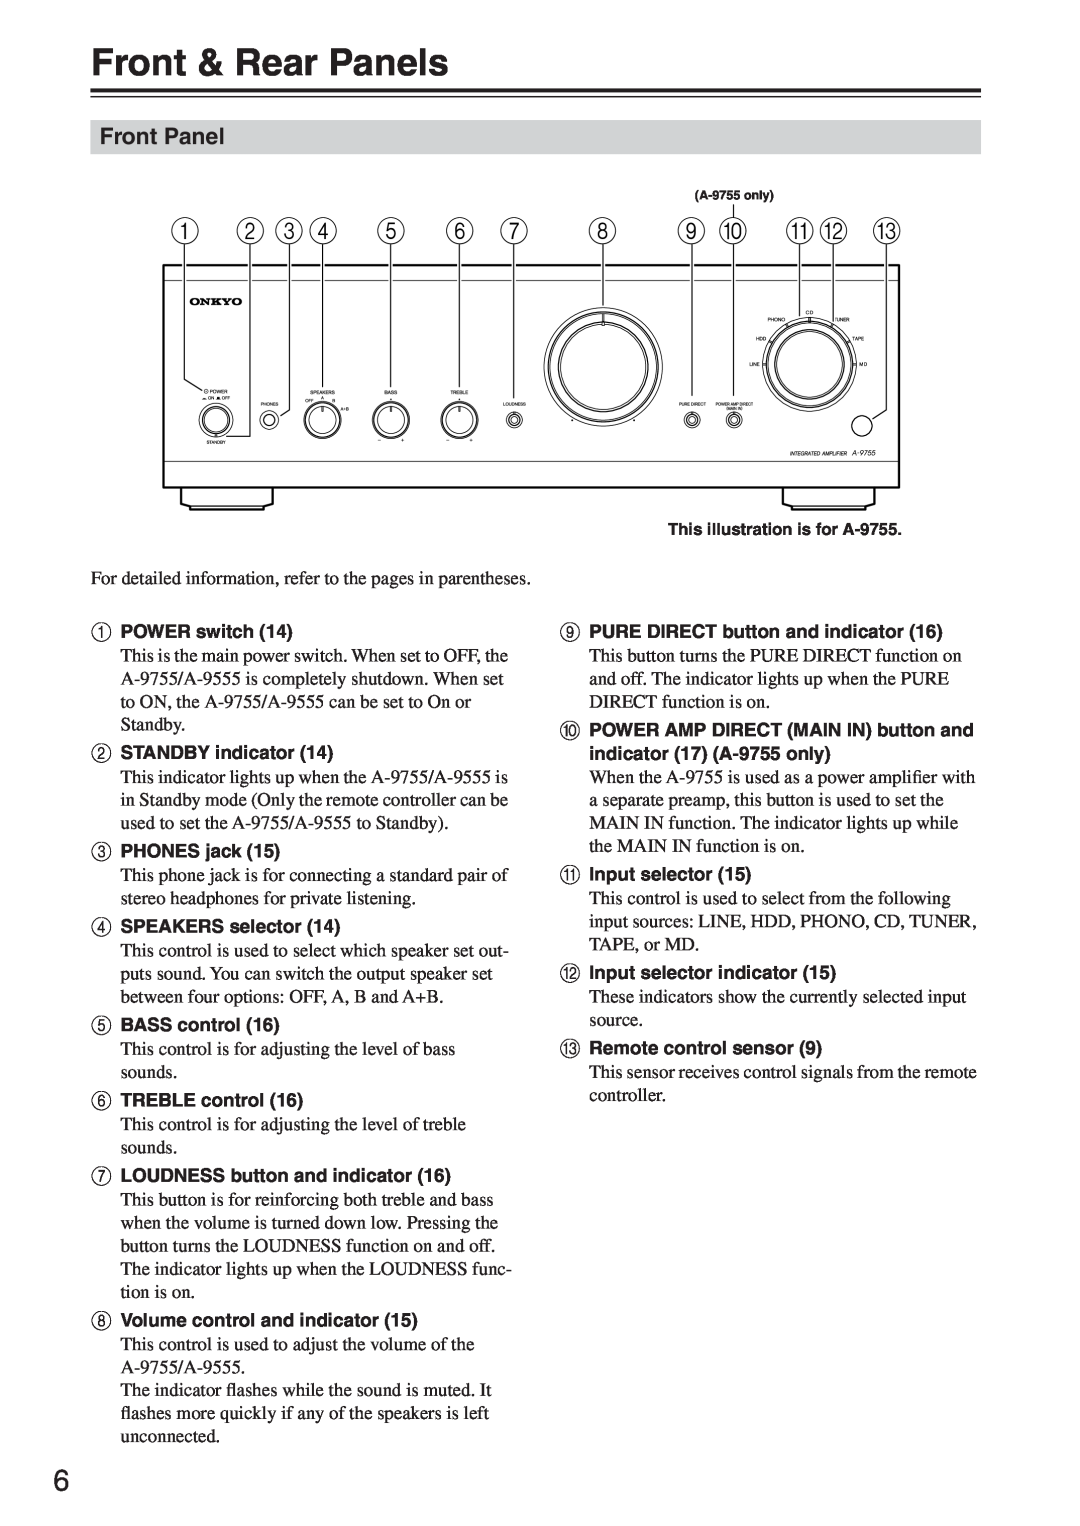 Onkyo 9555, A-9755 instruction manual Front & Rear Panels, 1 2 34 5 6 7 8 9 0 AB C, Front Panel 